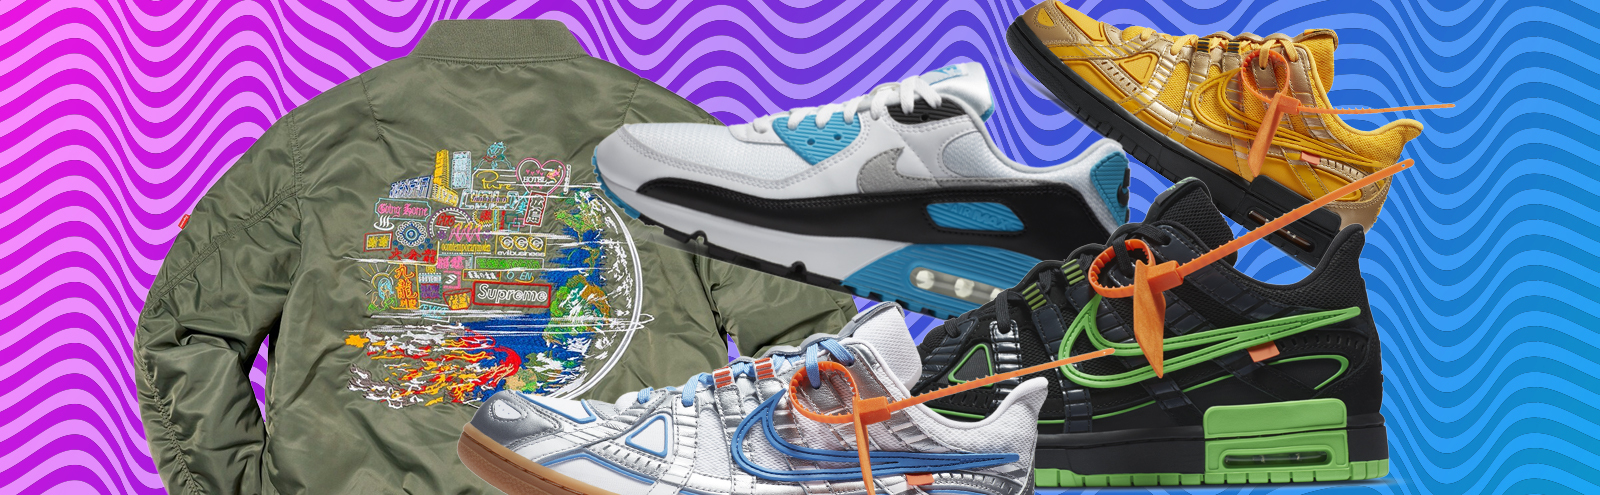 Ranking All of Supreme's Nike Collaborations, From Worst to Best